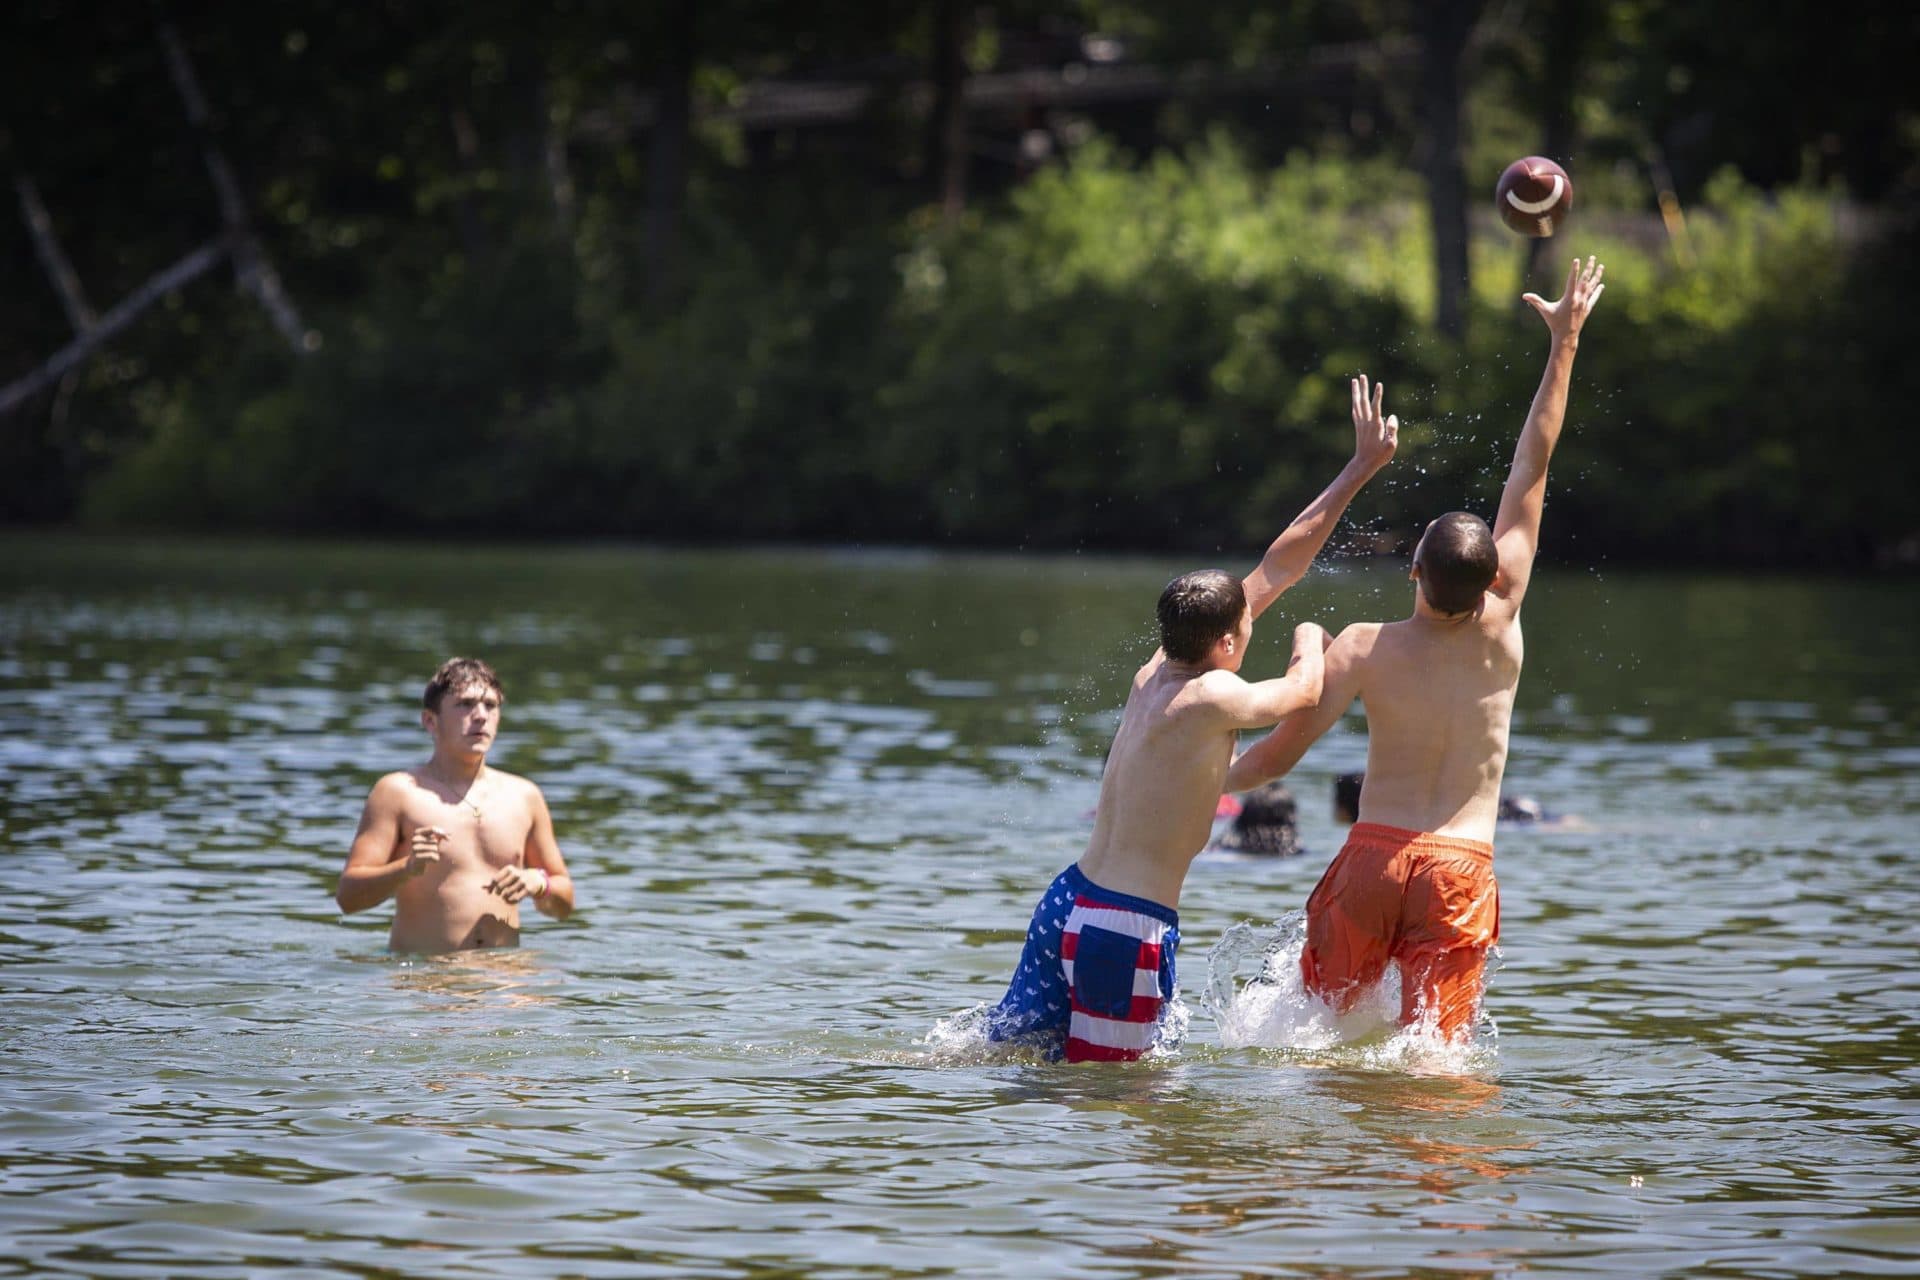 Swimmers cool off with a football at Crystal Lake in Newton. (Robin Lubbock/WBUR)